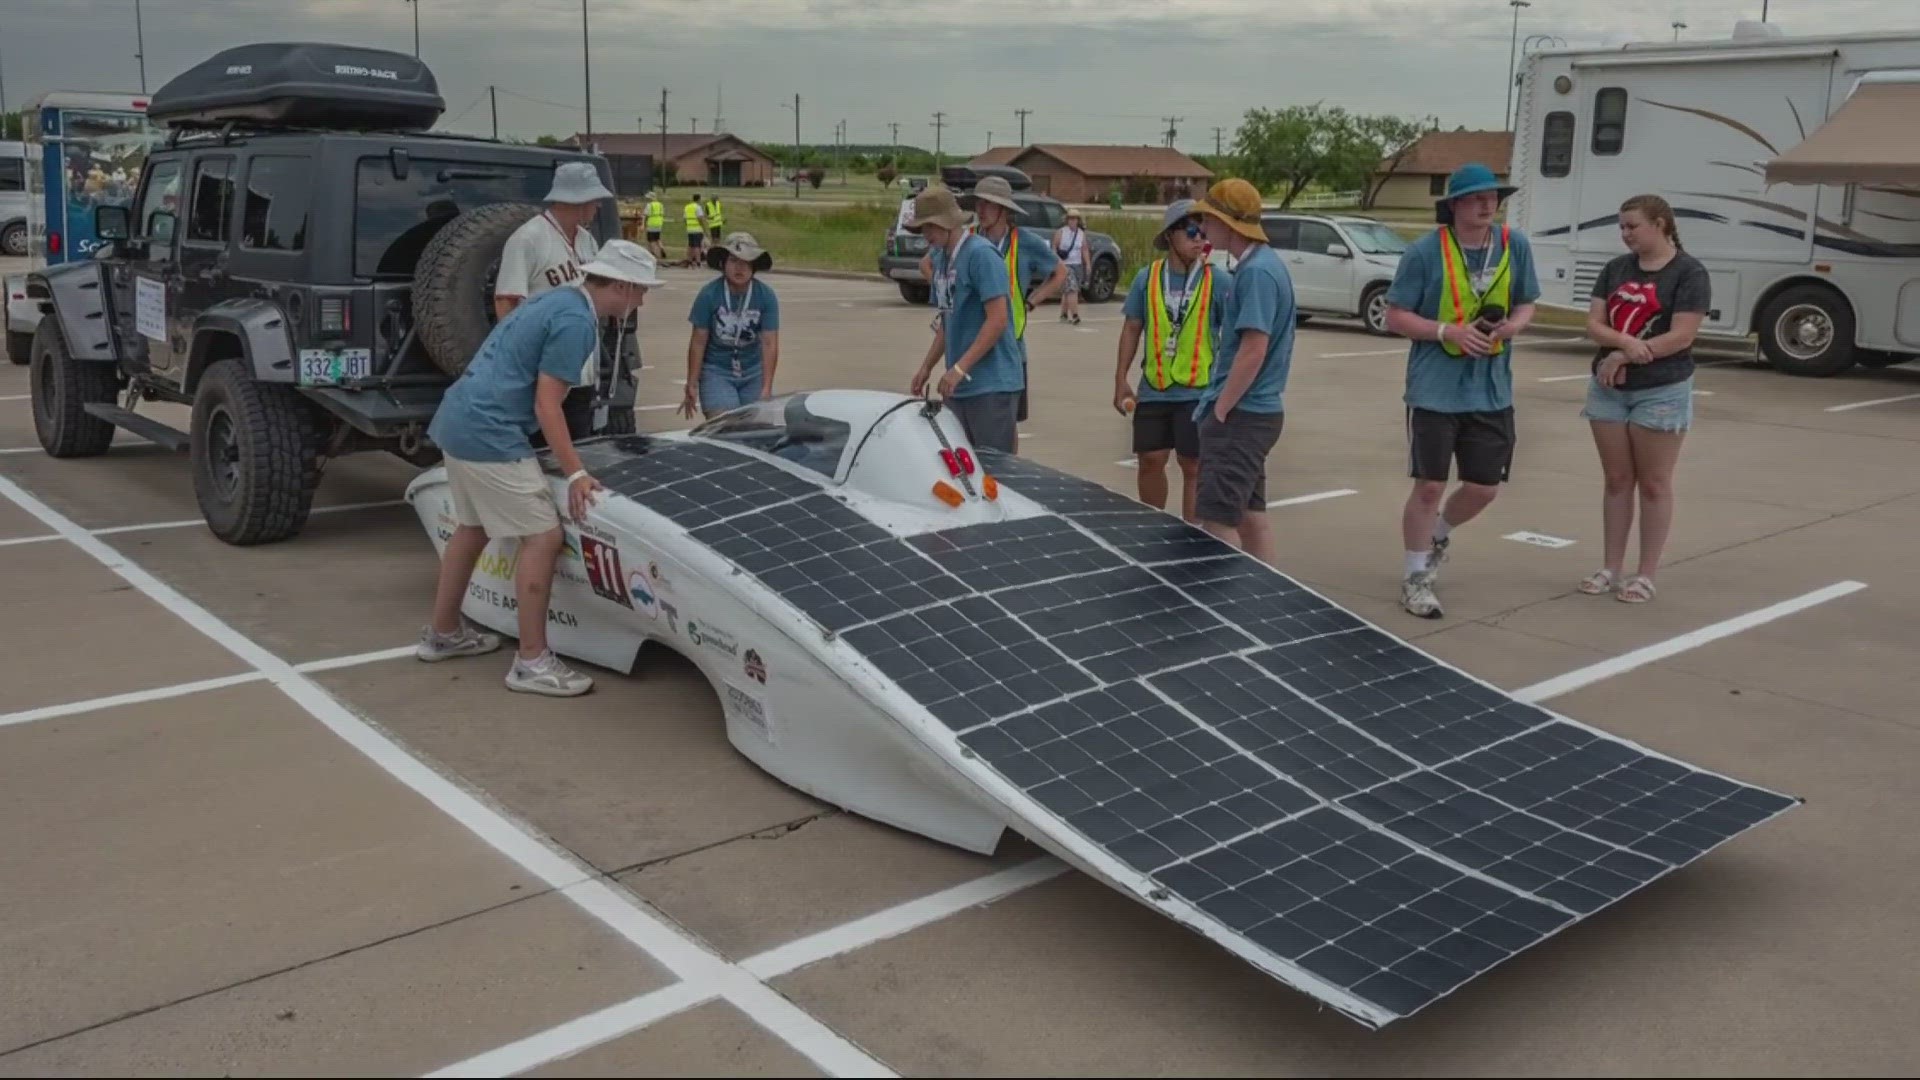 High school students in central Oregon built a solar-powered car from scratch and raced it in a national competition.